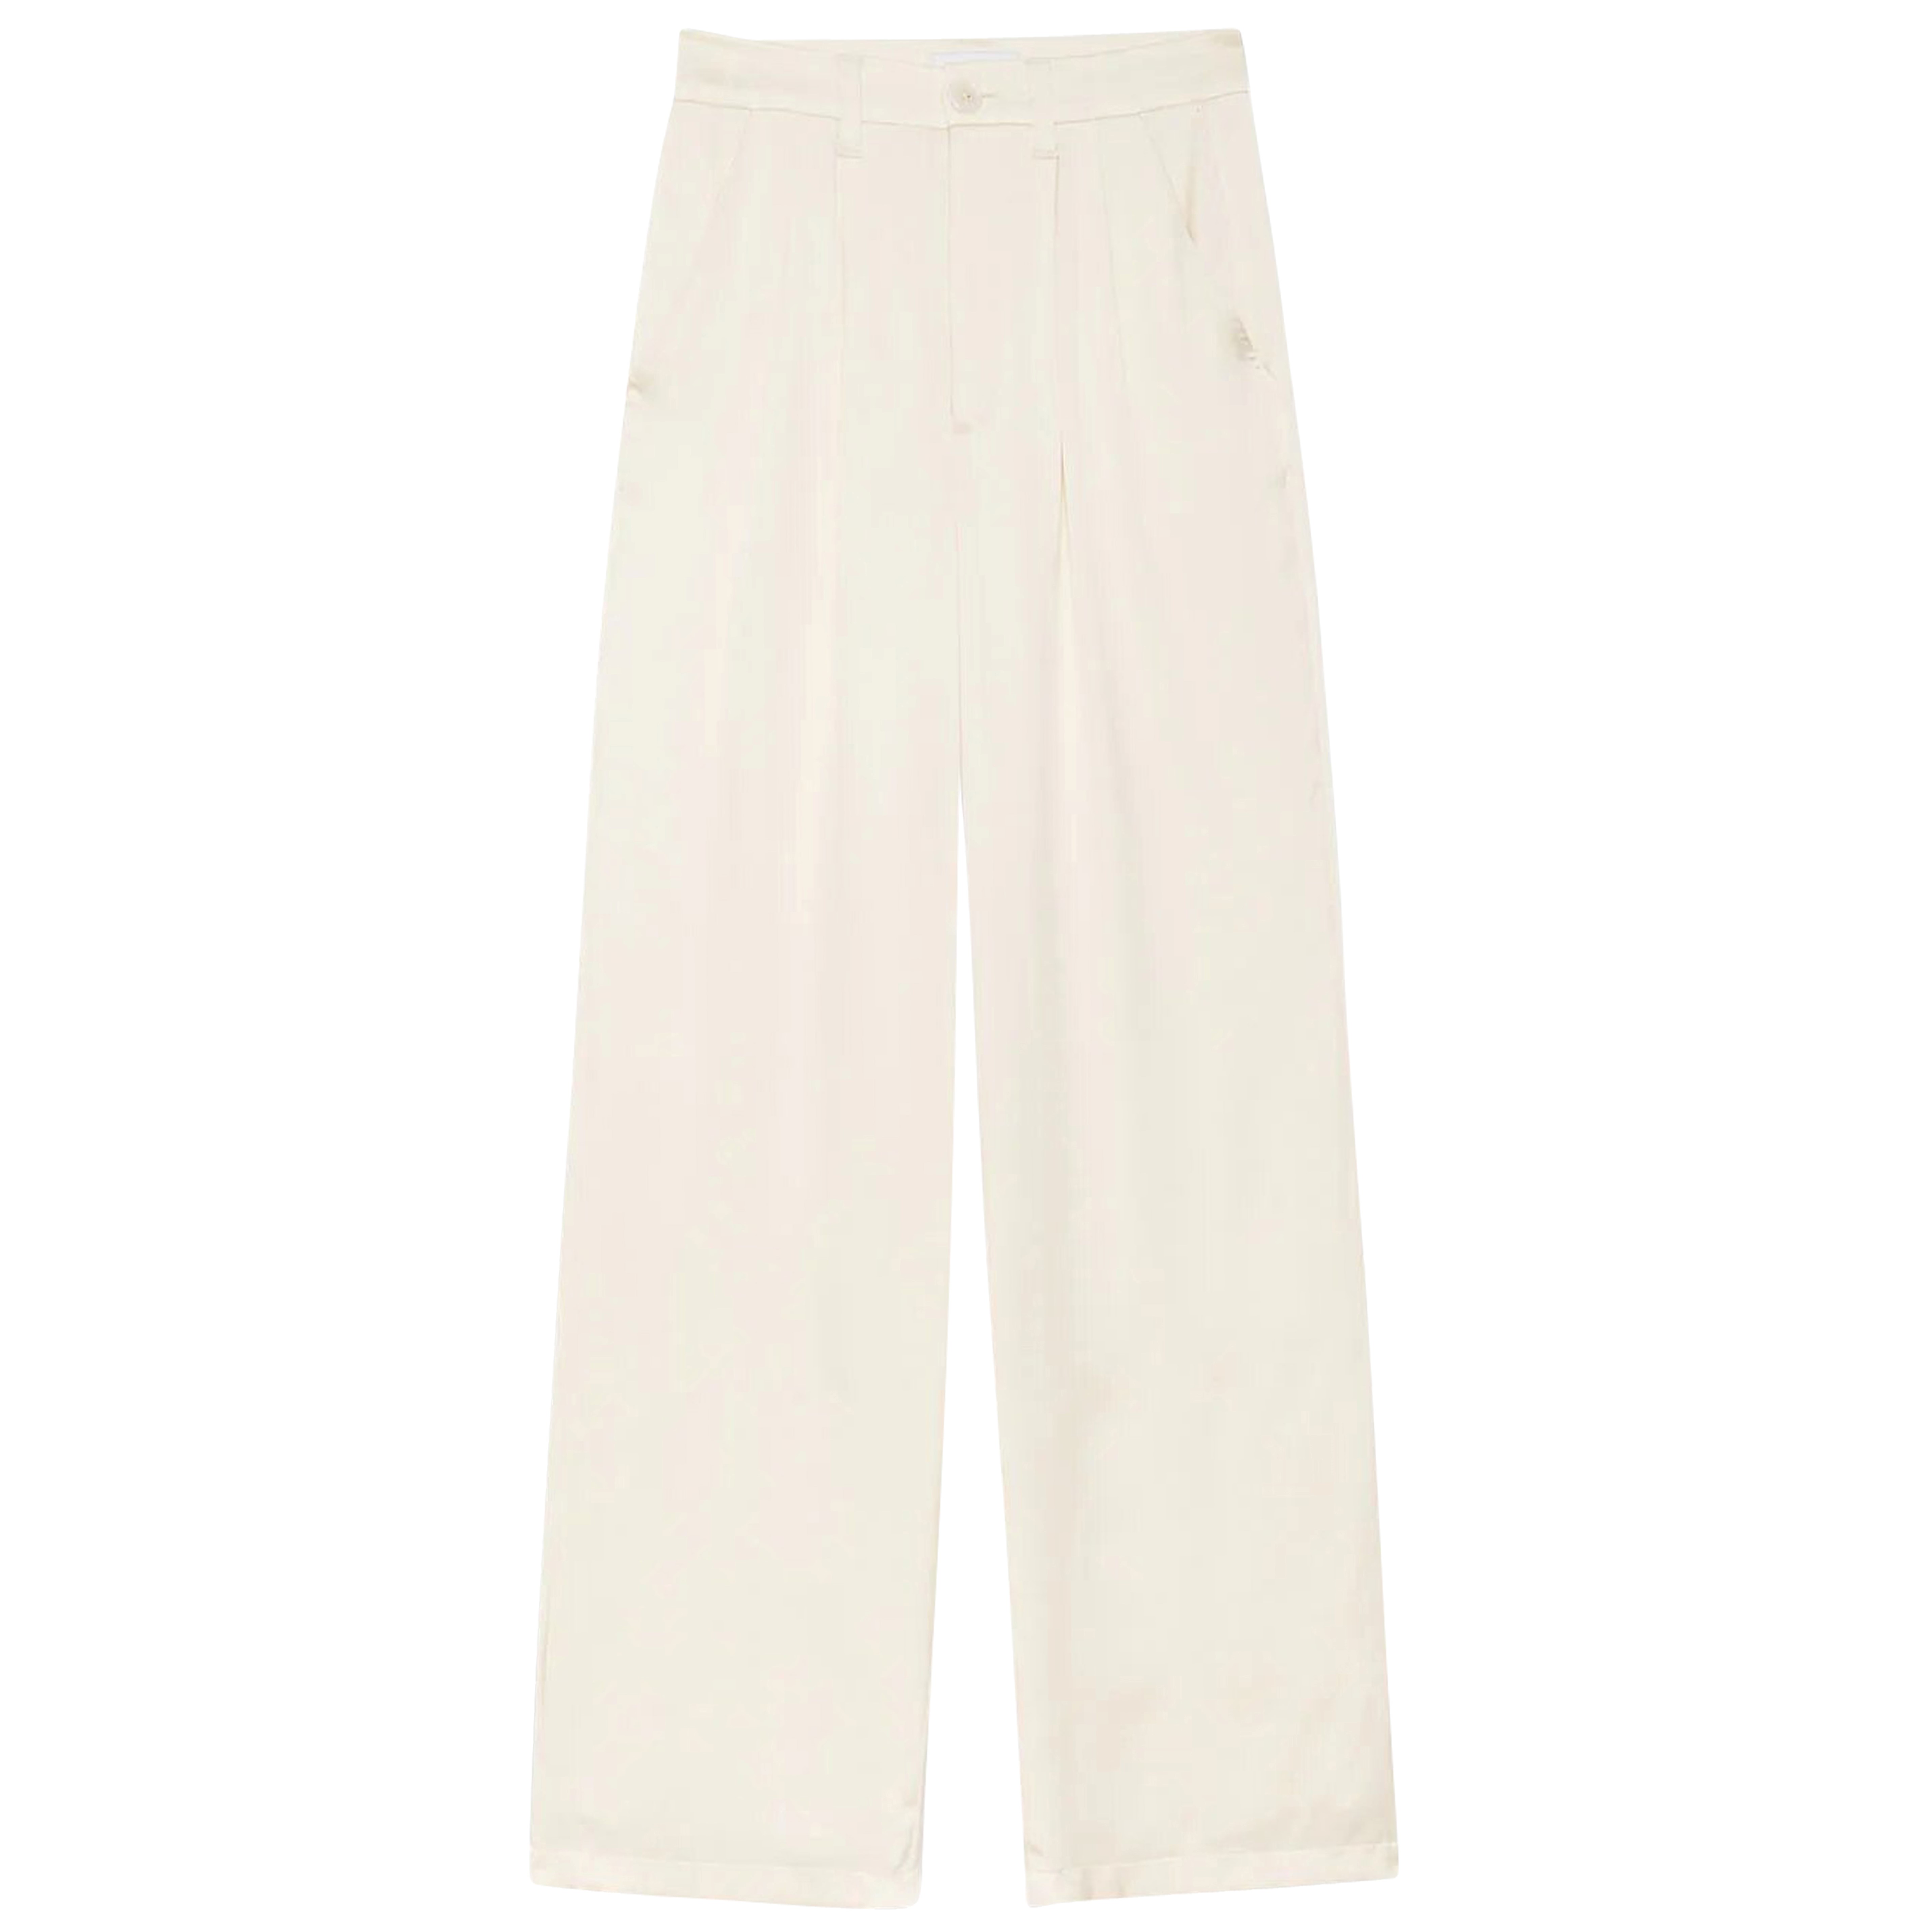 ANINE BING Carrie Pant in Cream